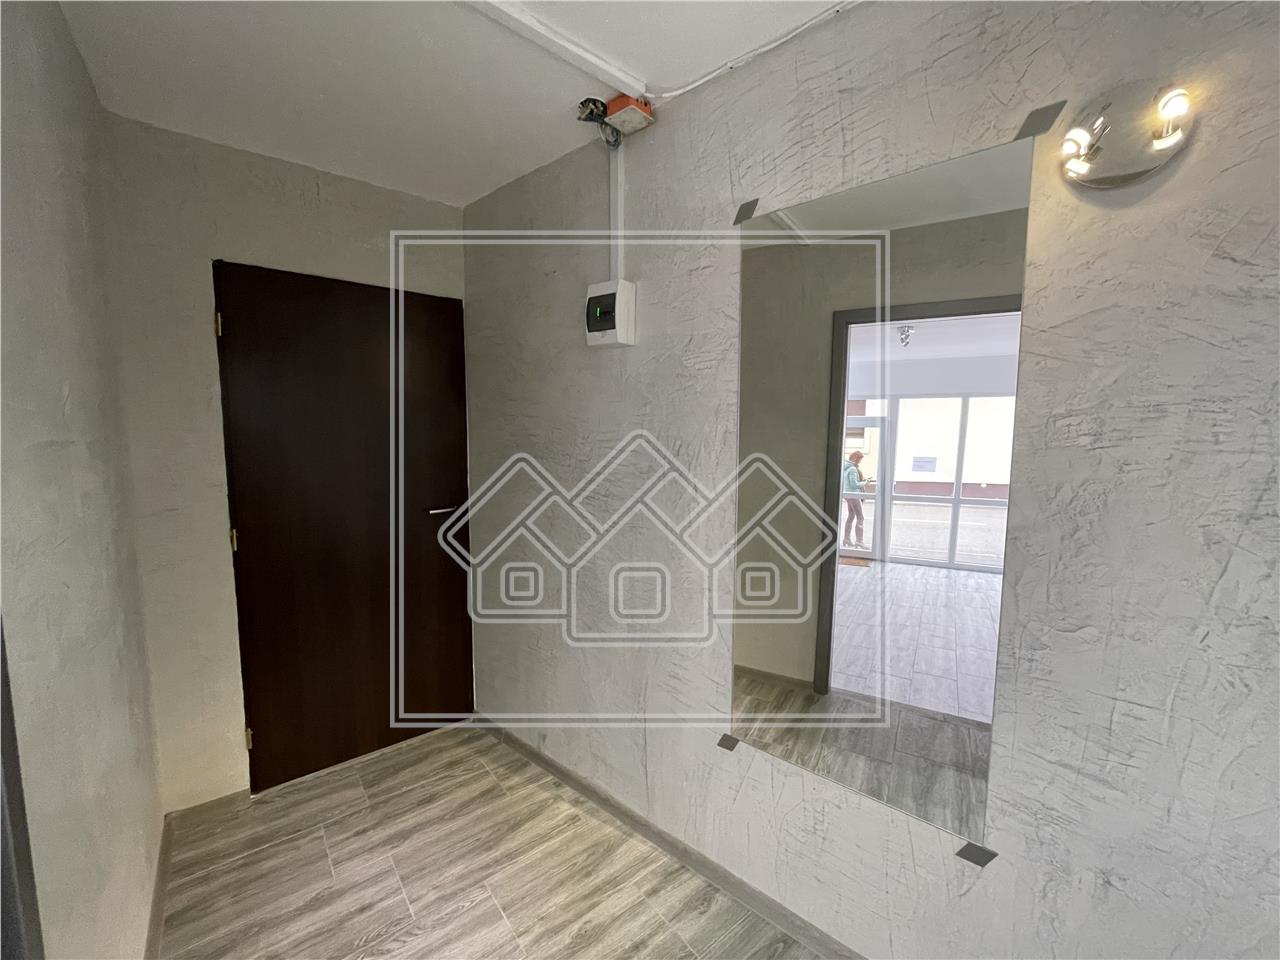 Commercial for rent in Sibiu - first rental